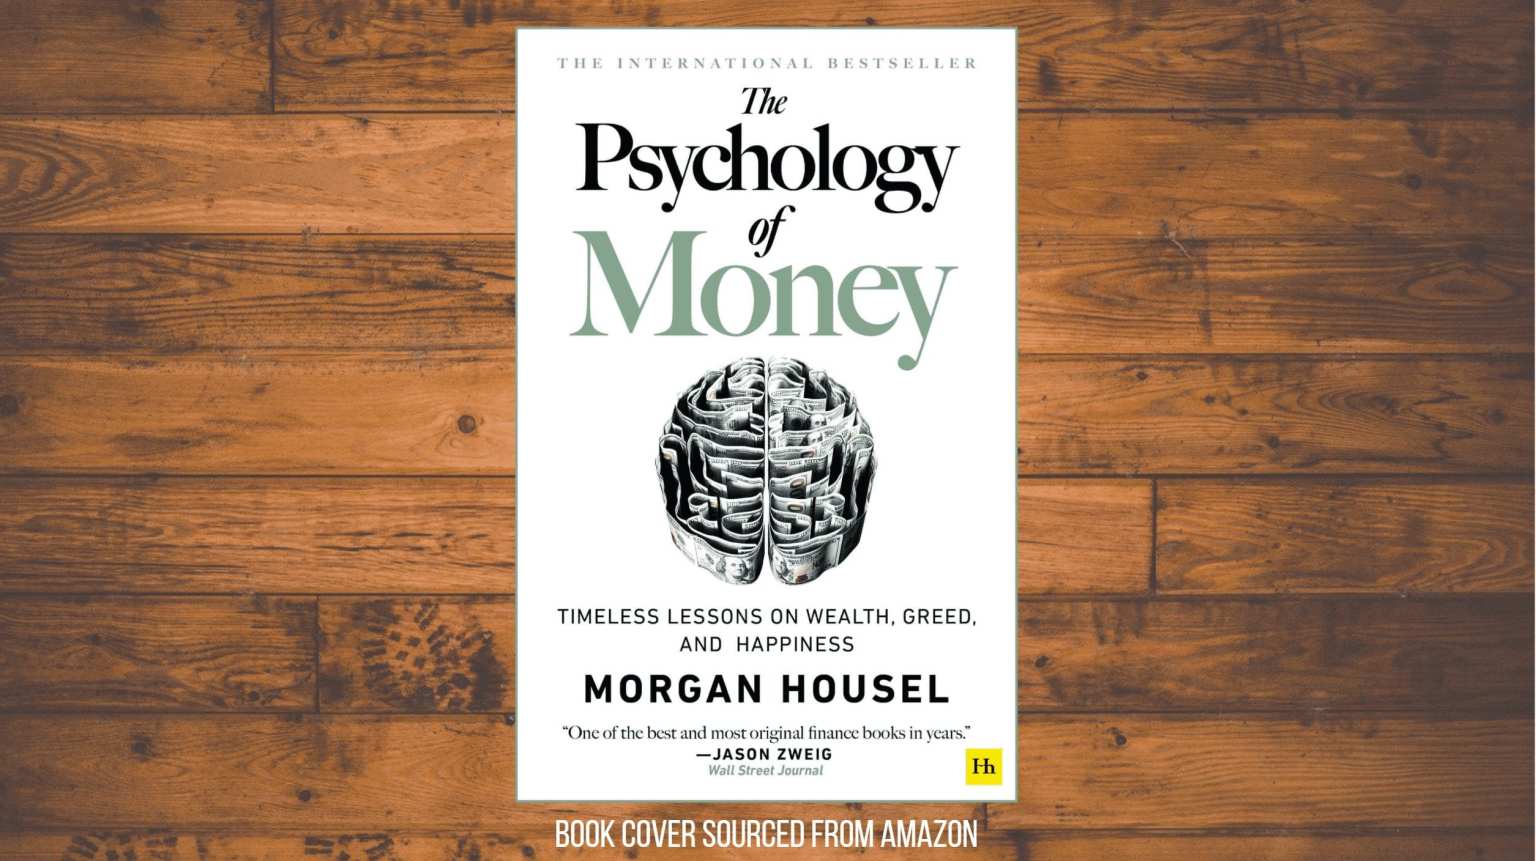 book review on the psychology of money